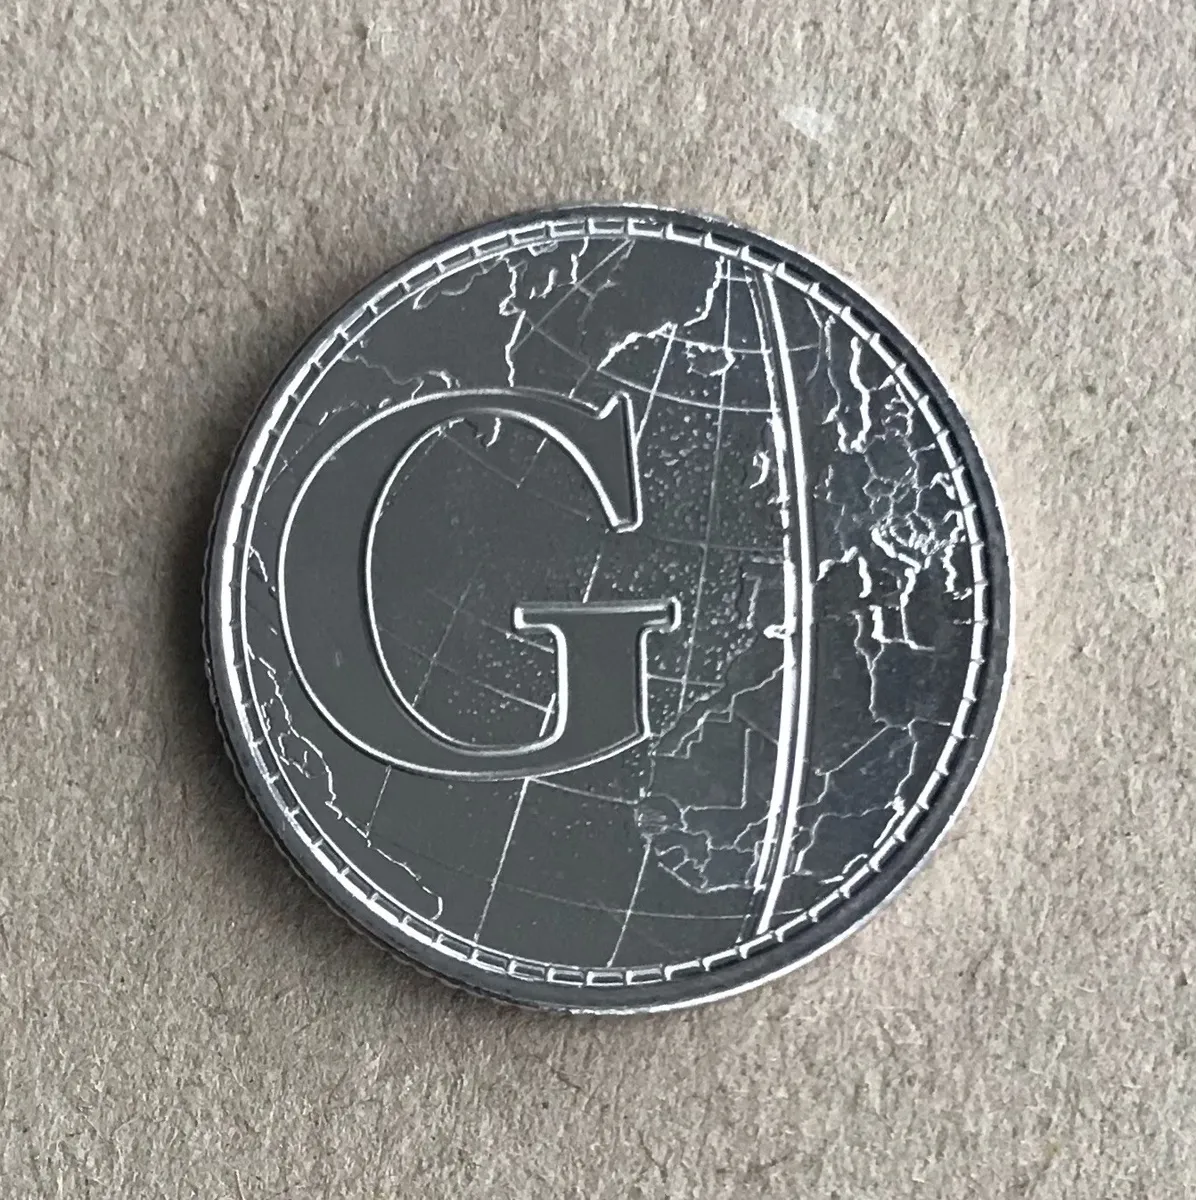 UK and A to Z 10p coin values